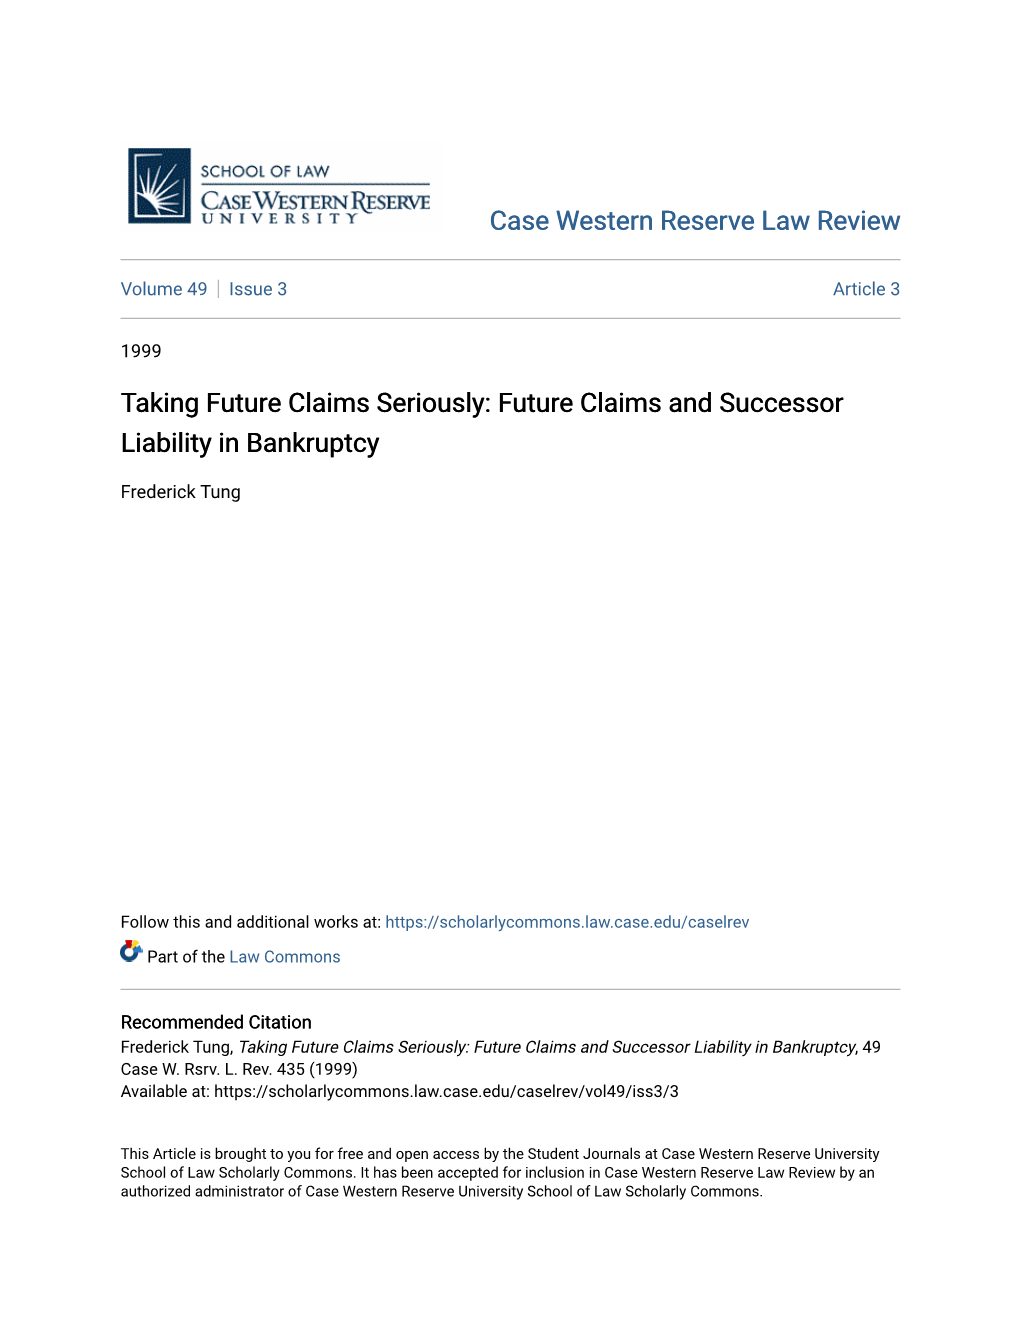 Future Claims and Successor Liability in Bankruptcy